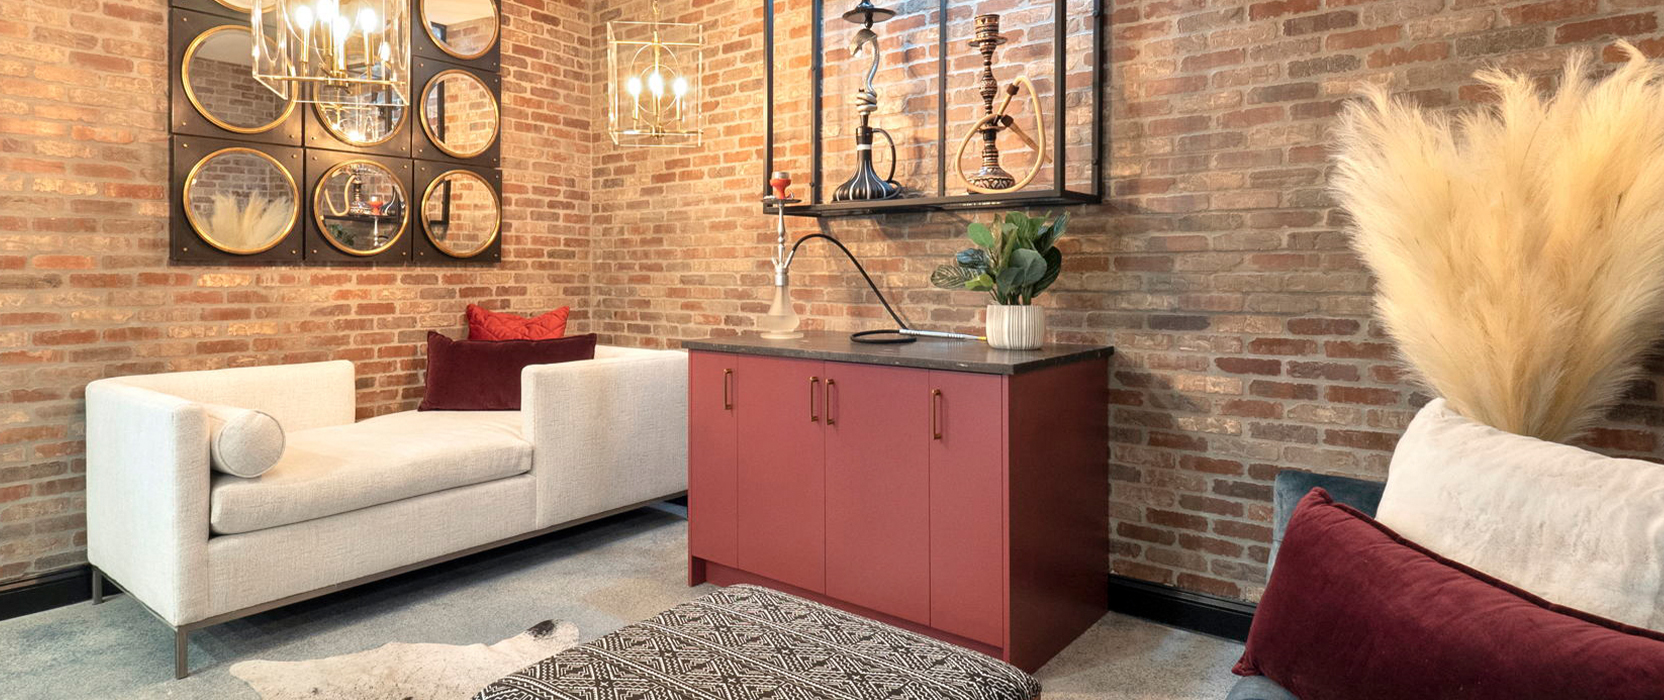 Hookah bar area in basement with mirrored wall art on brick walls, a red painted bar, hookah pipes on display and chaise lounge style seating.